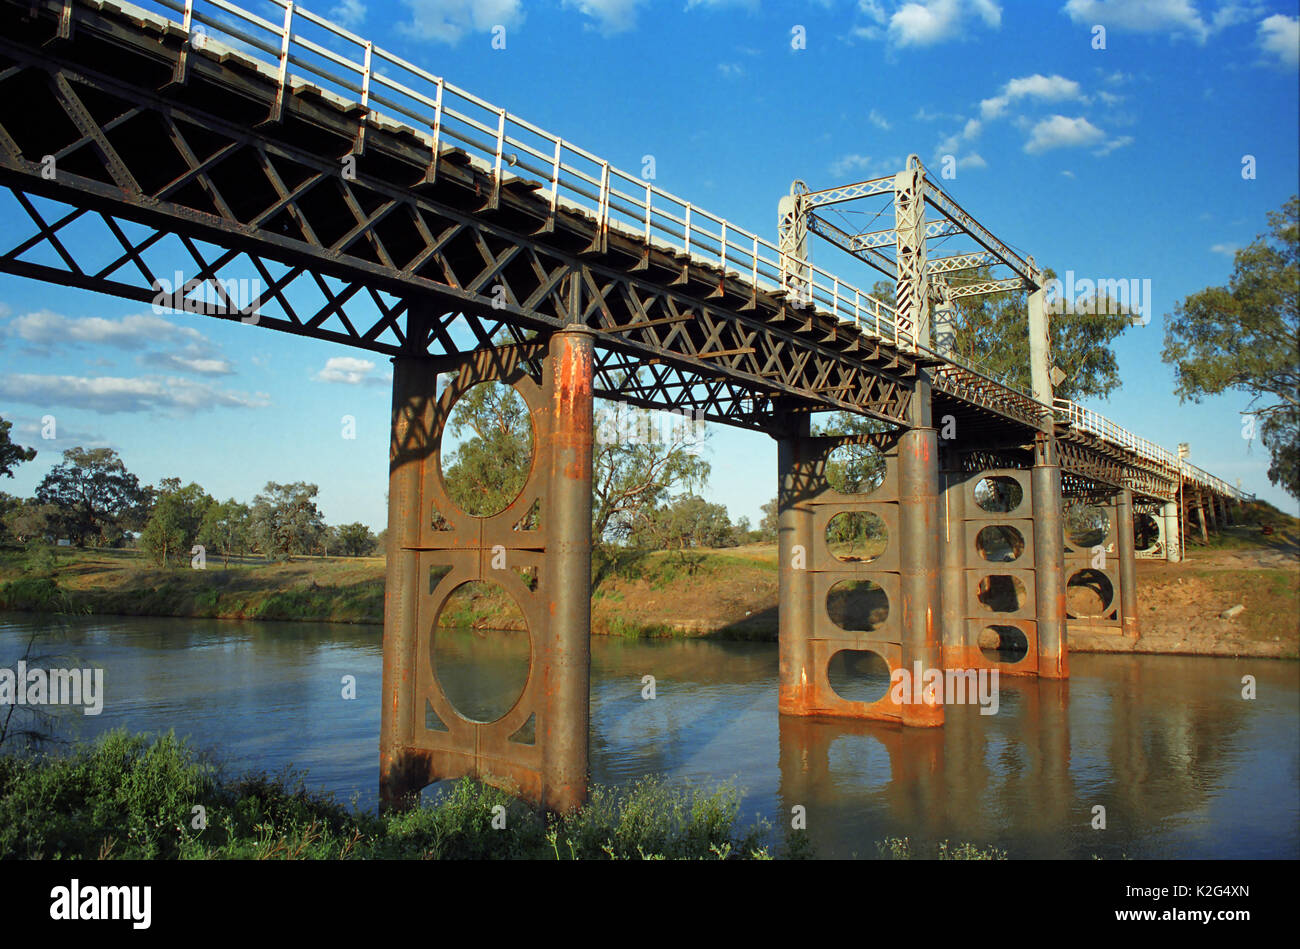 The old lifting bridge over the River Darling, North Bourke, far west NSW, Australia. Stock Photo